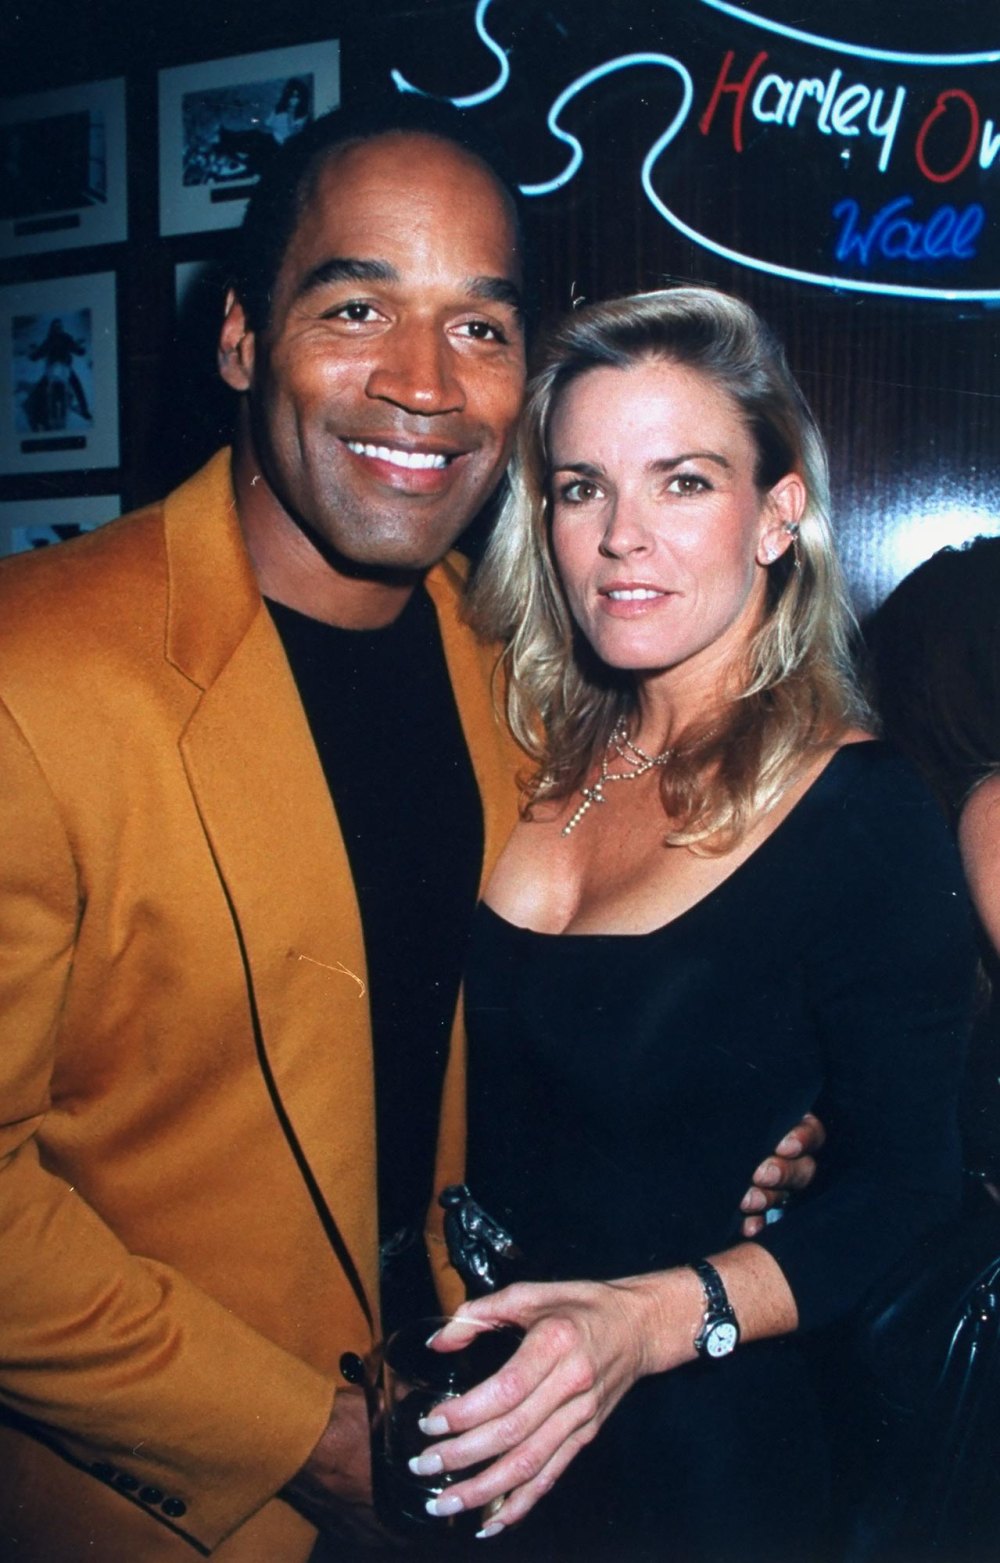 Nicole Brown Simpson Doc Addresses O.J. Simpson Relationship, Kris Jenner Interview and More Revelations